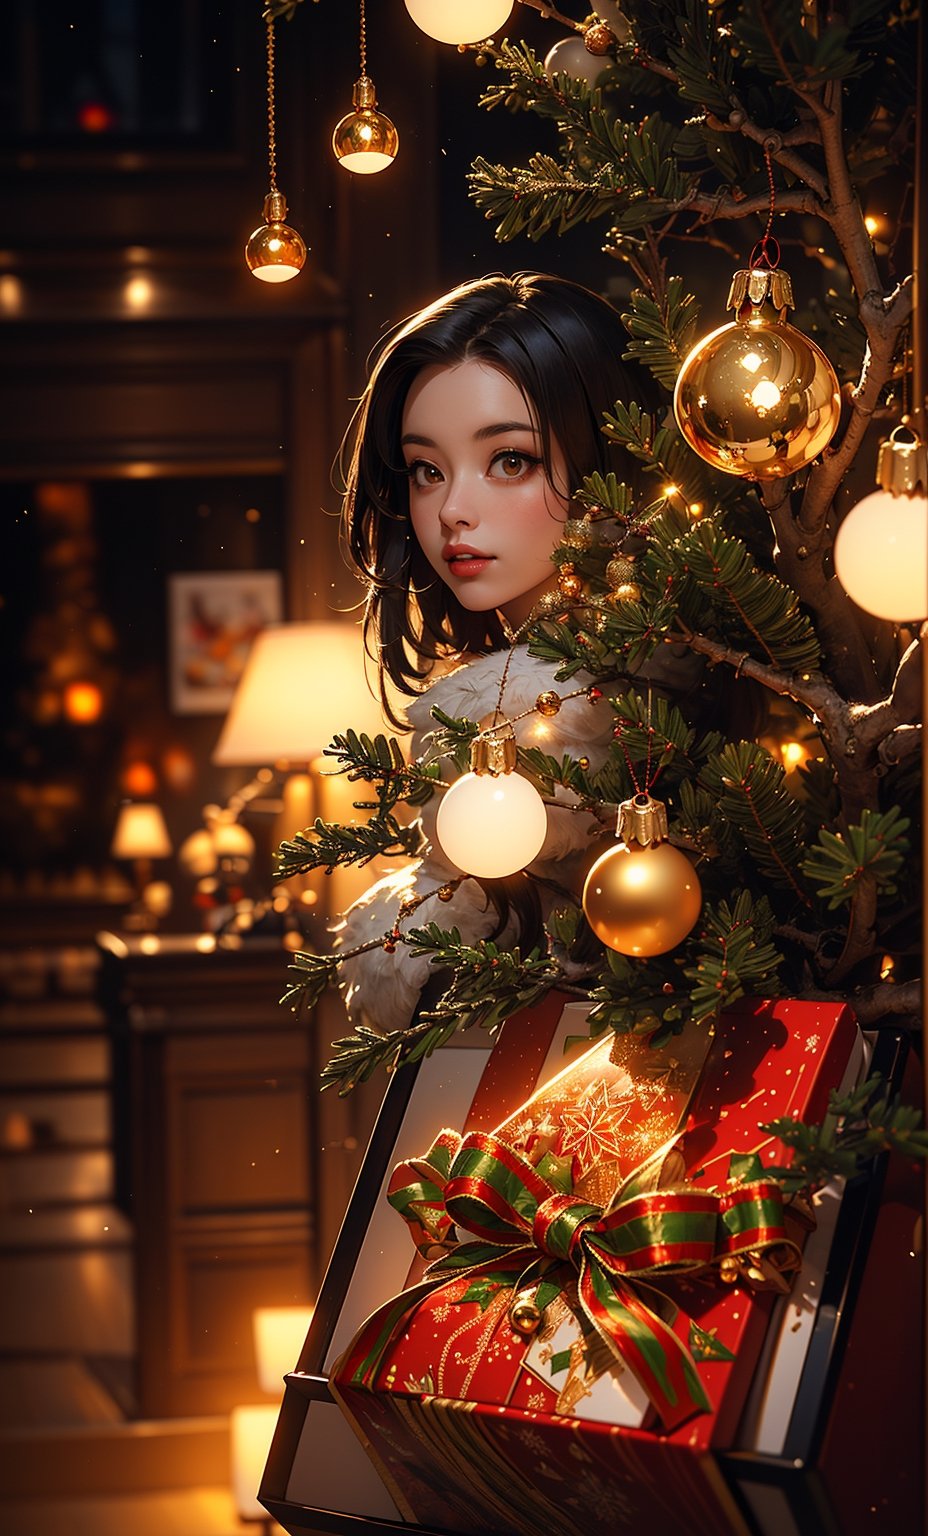 (Masterpiece, Top Quality, Top Quality, Official Art, Aesthetic:1.2), (1girl), Beautiful Girl in Christmas Costume, Extremely Detailed, Christmas Decoration, (Christmas Box, Christmas, Candy, Gold Bell, Ornament, Christmas Tree), Living Room, ( Fractal Art:1.3), supremely detailed, landscapes, lights, twinkling,Christmas,sntdrs